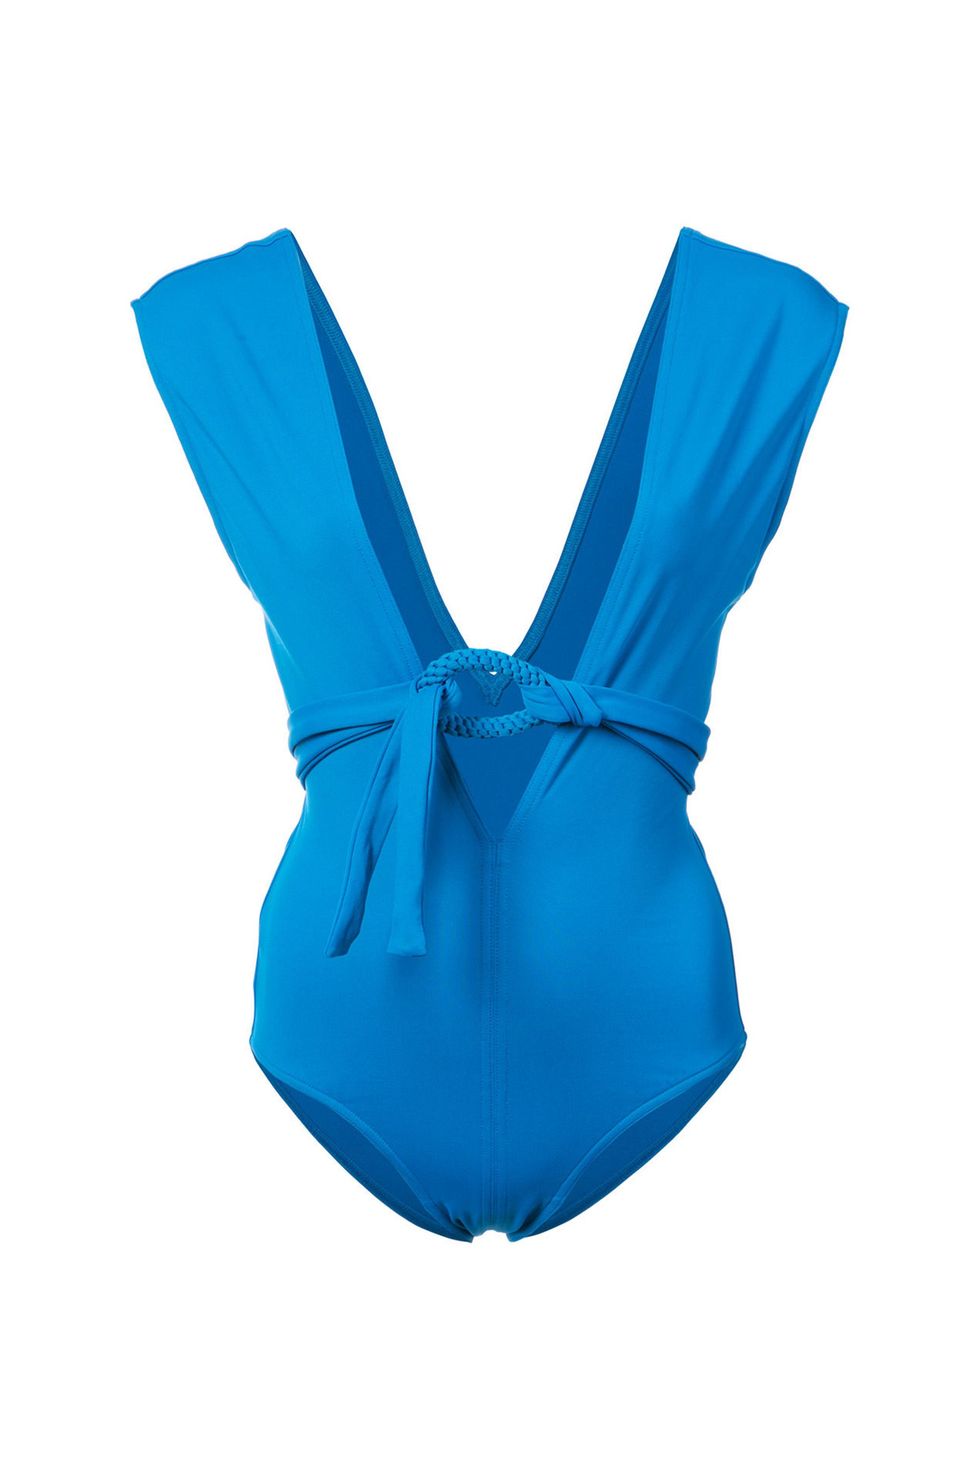 15 Best Belted Swimsuits for 2019 - Cutest One-Pieces & Bikinis With Belts